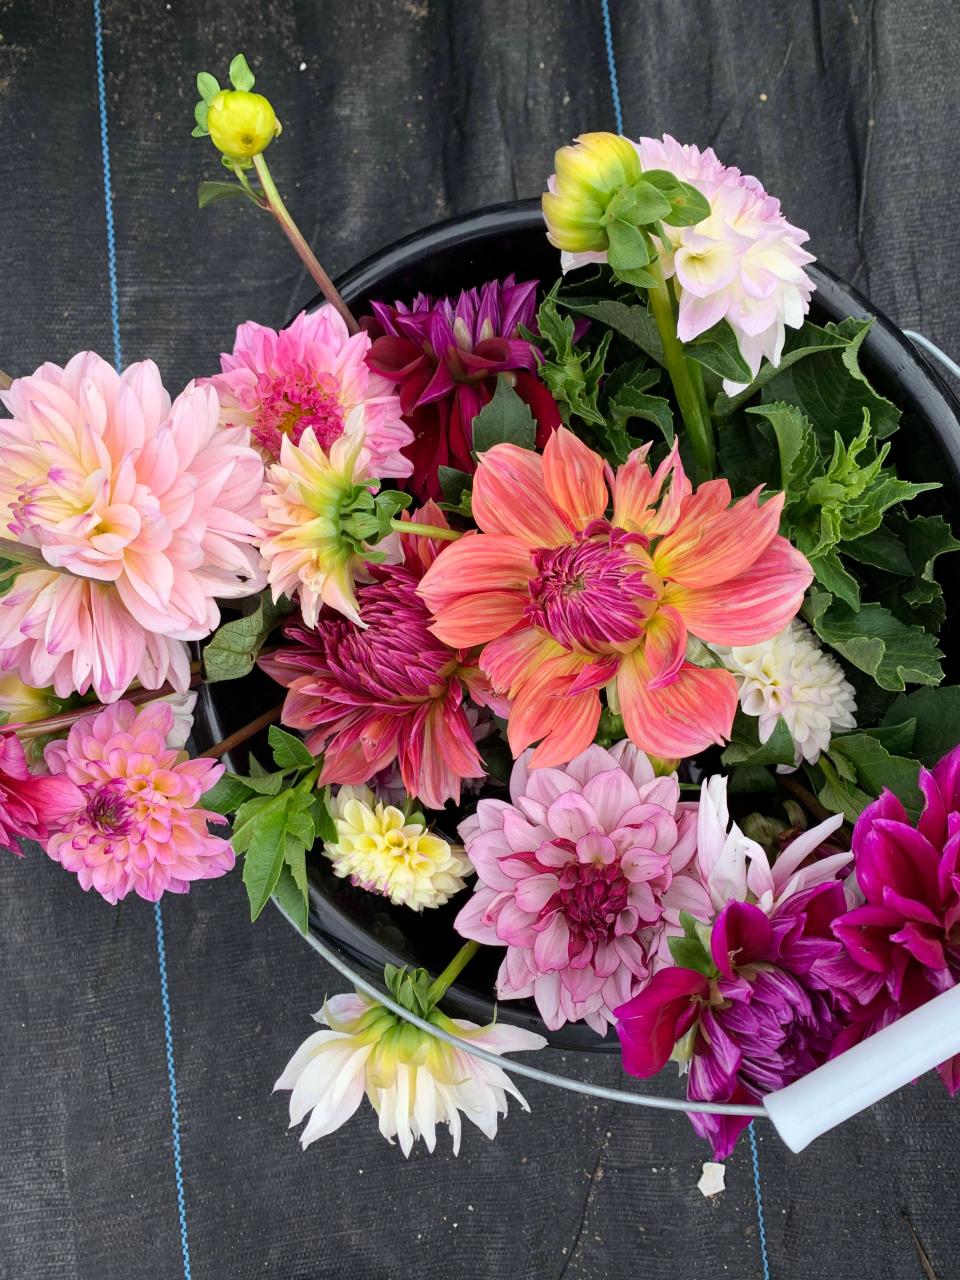 Pick a bucket of flowers at The Farmer's Daughter in South Kingstown.